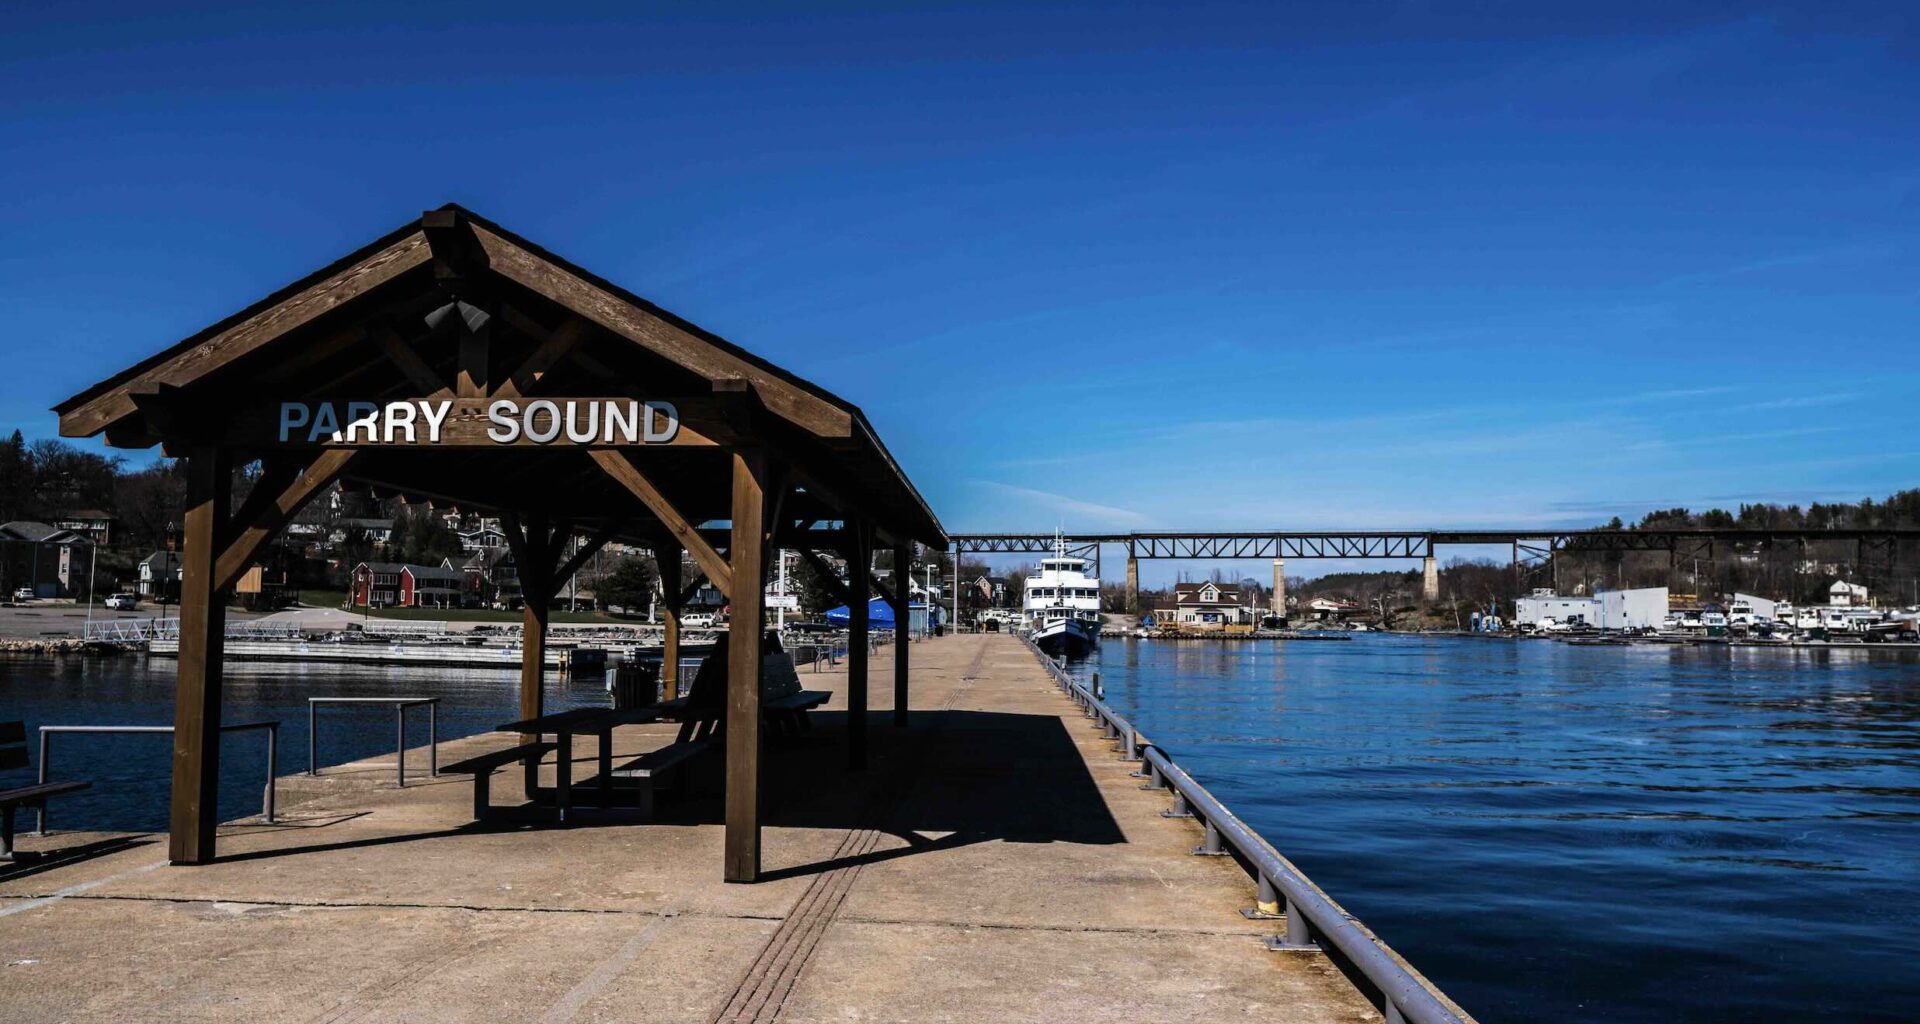 shutterstockMary Anne Love - Parry Sound Parry Sound harbour and pier at one of the best thigns to do in Parry Sound